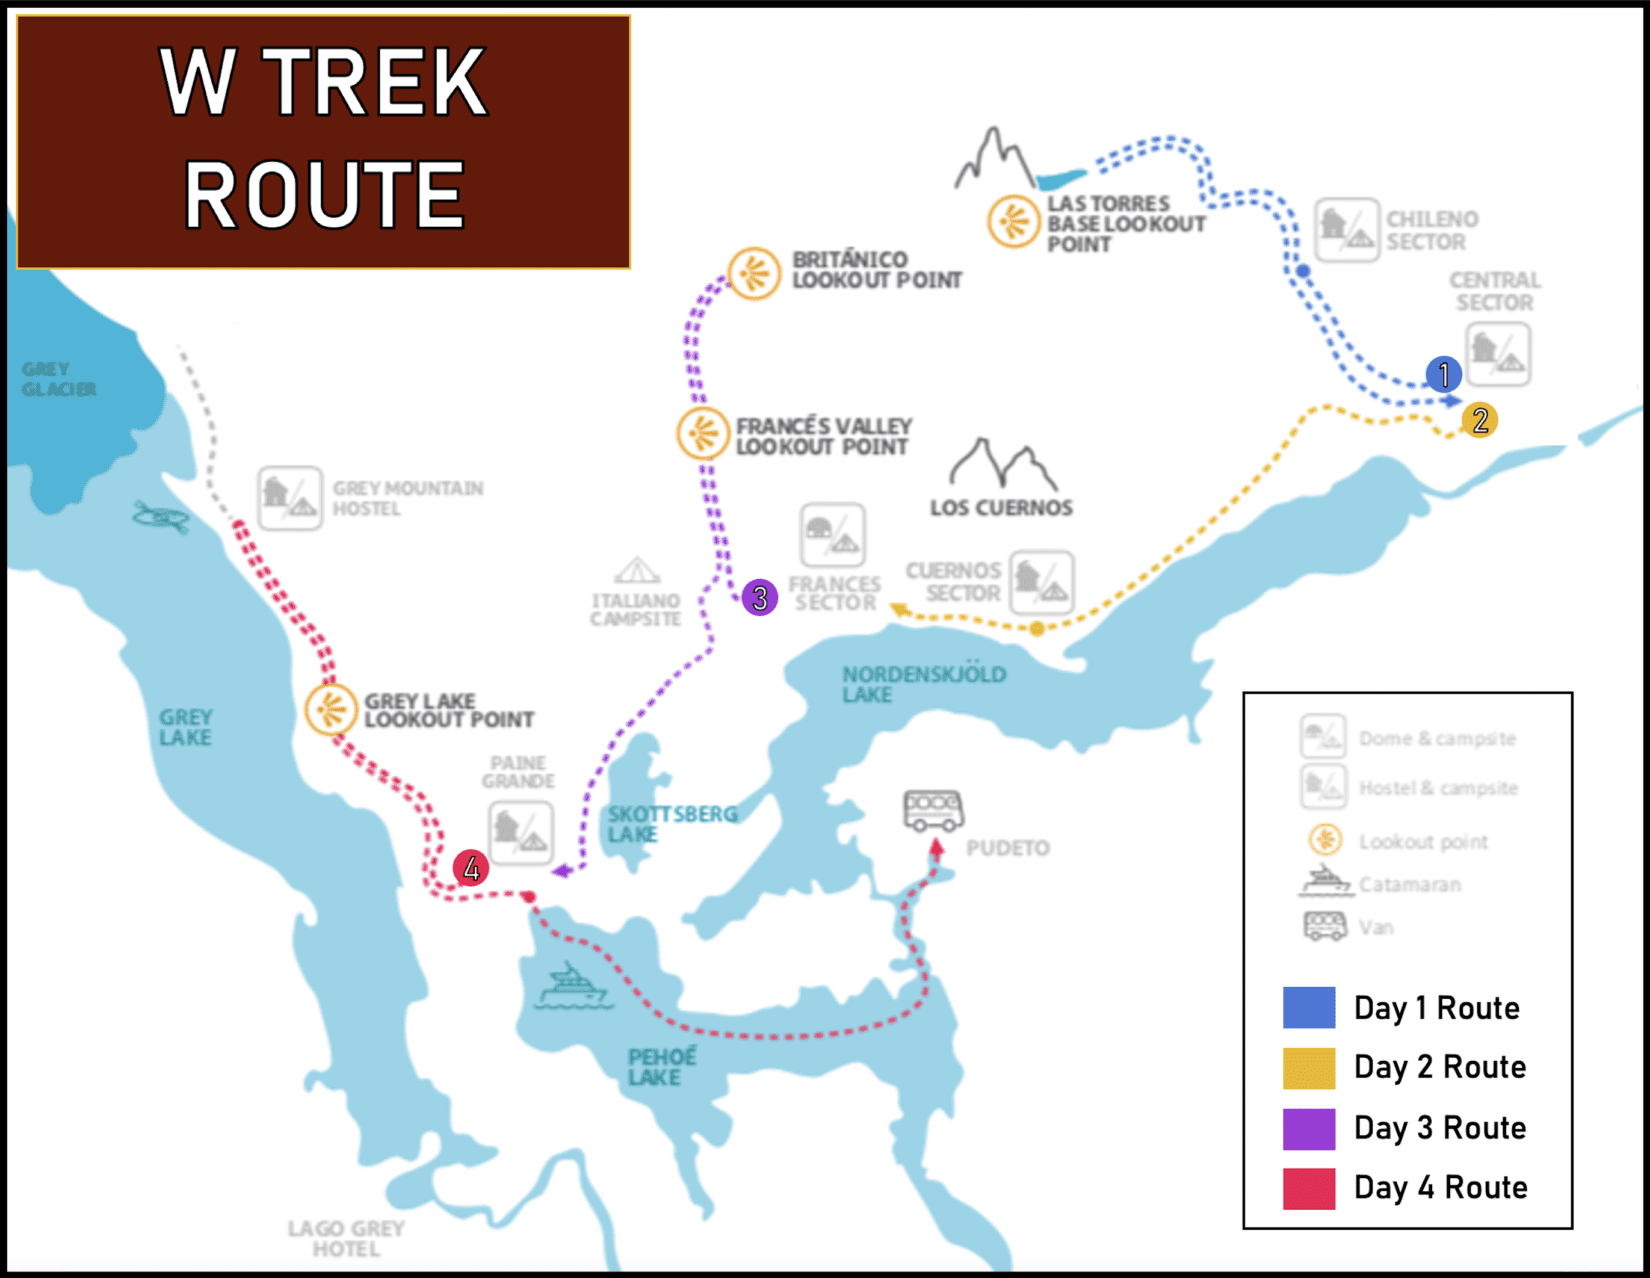 A map of the W Trek route in Torres del Paine National Park, Chile. The map shows the four-day hiking route going from east to west